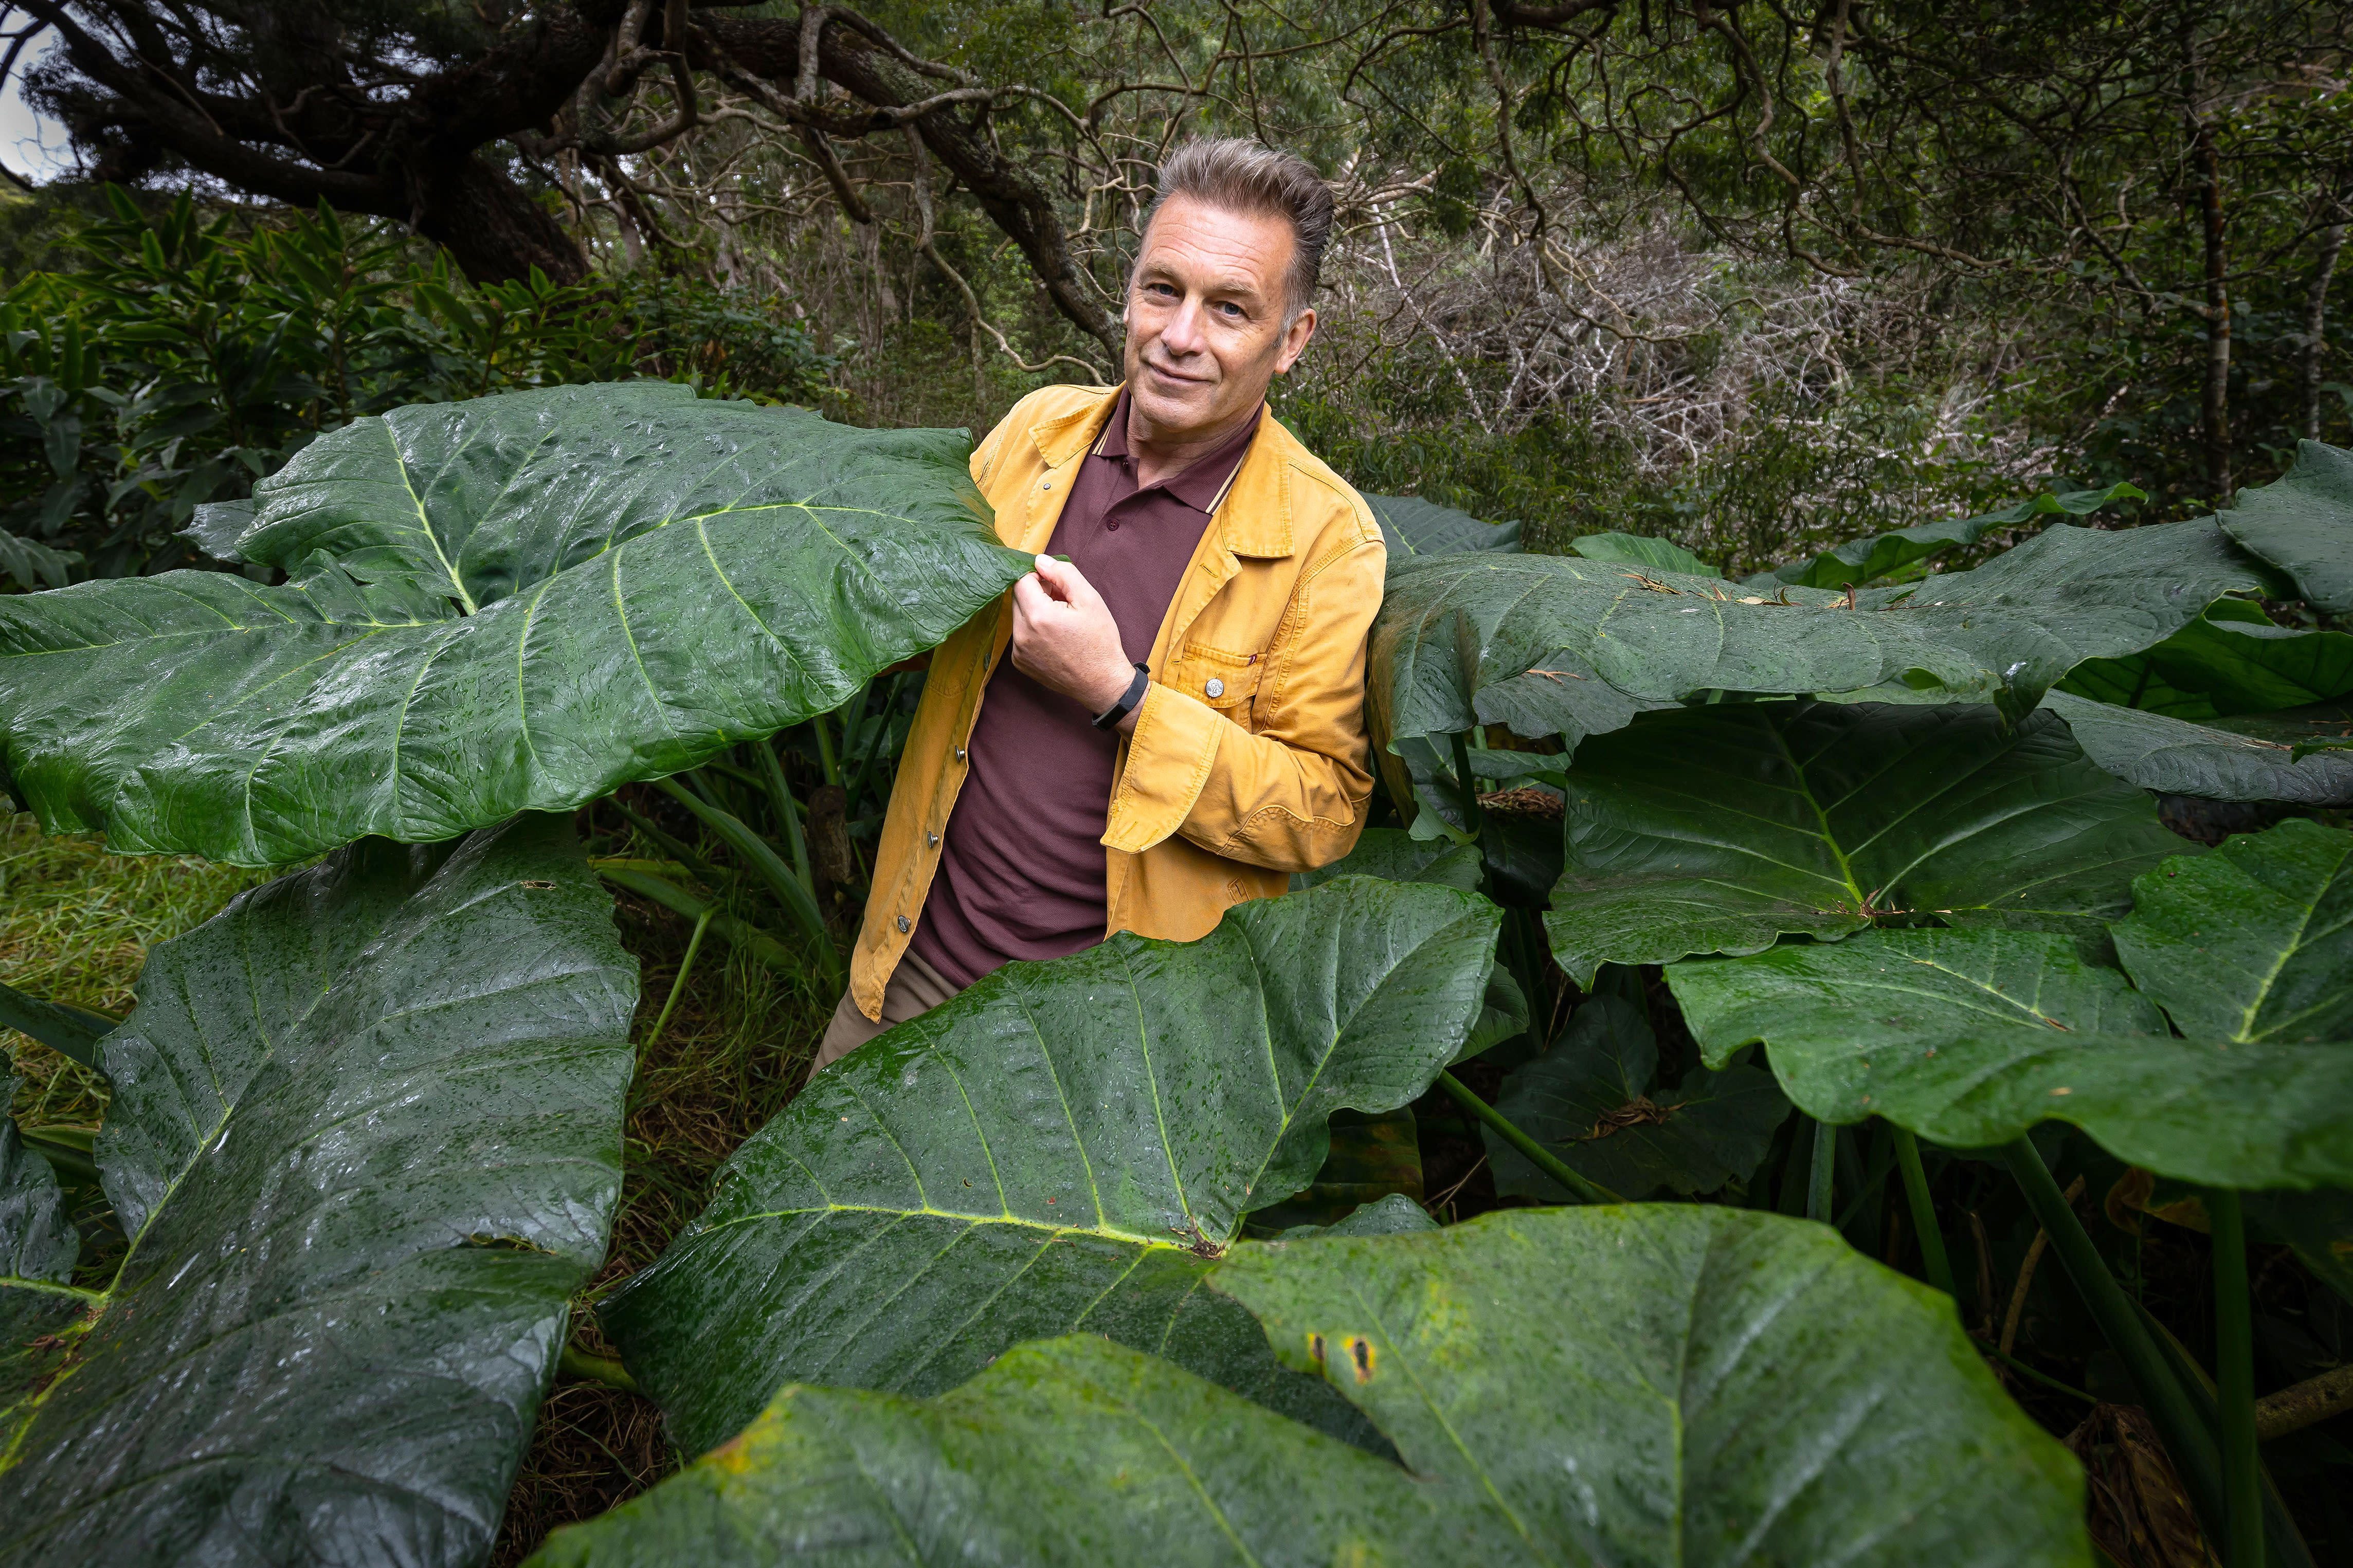 BBC Greenlights ‘Evolution’ With Chris Packham & Reveals It Has Doubled Its Number Of Blue-Chip Science Shows Per Year